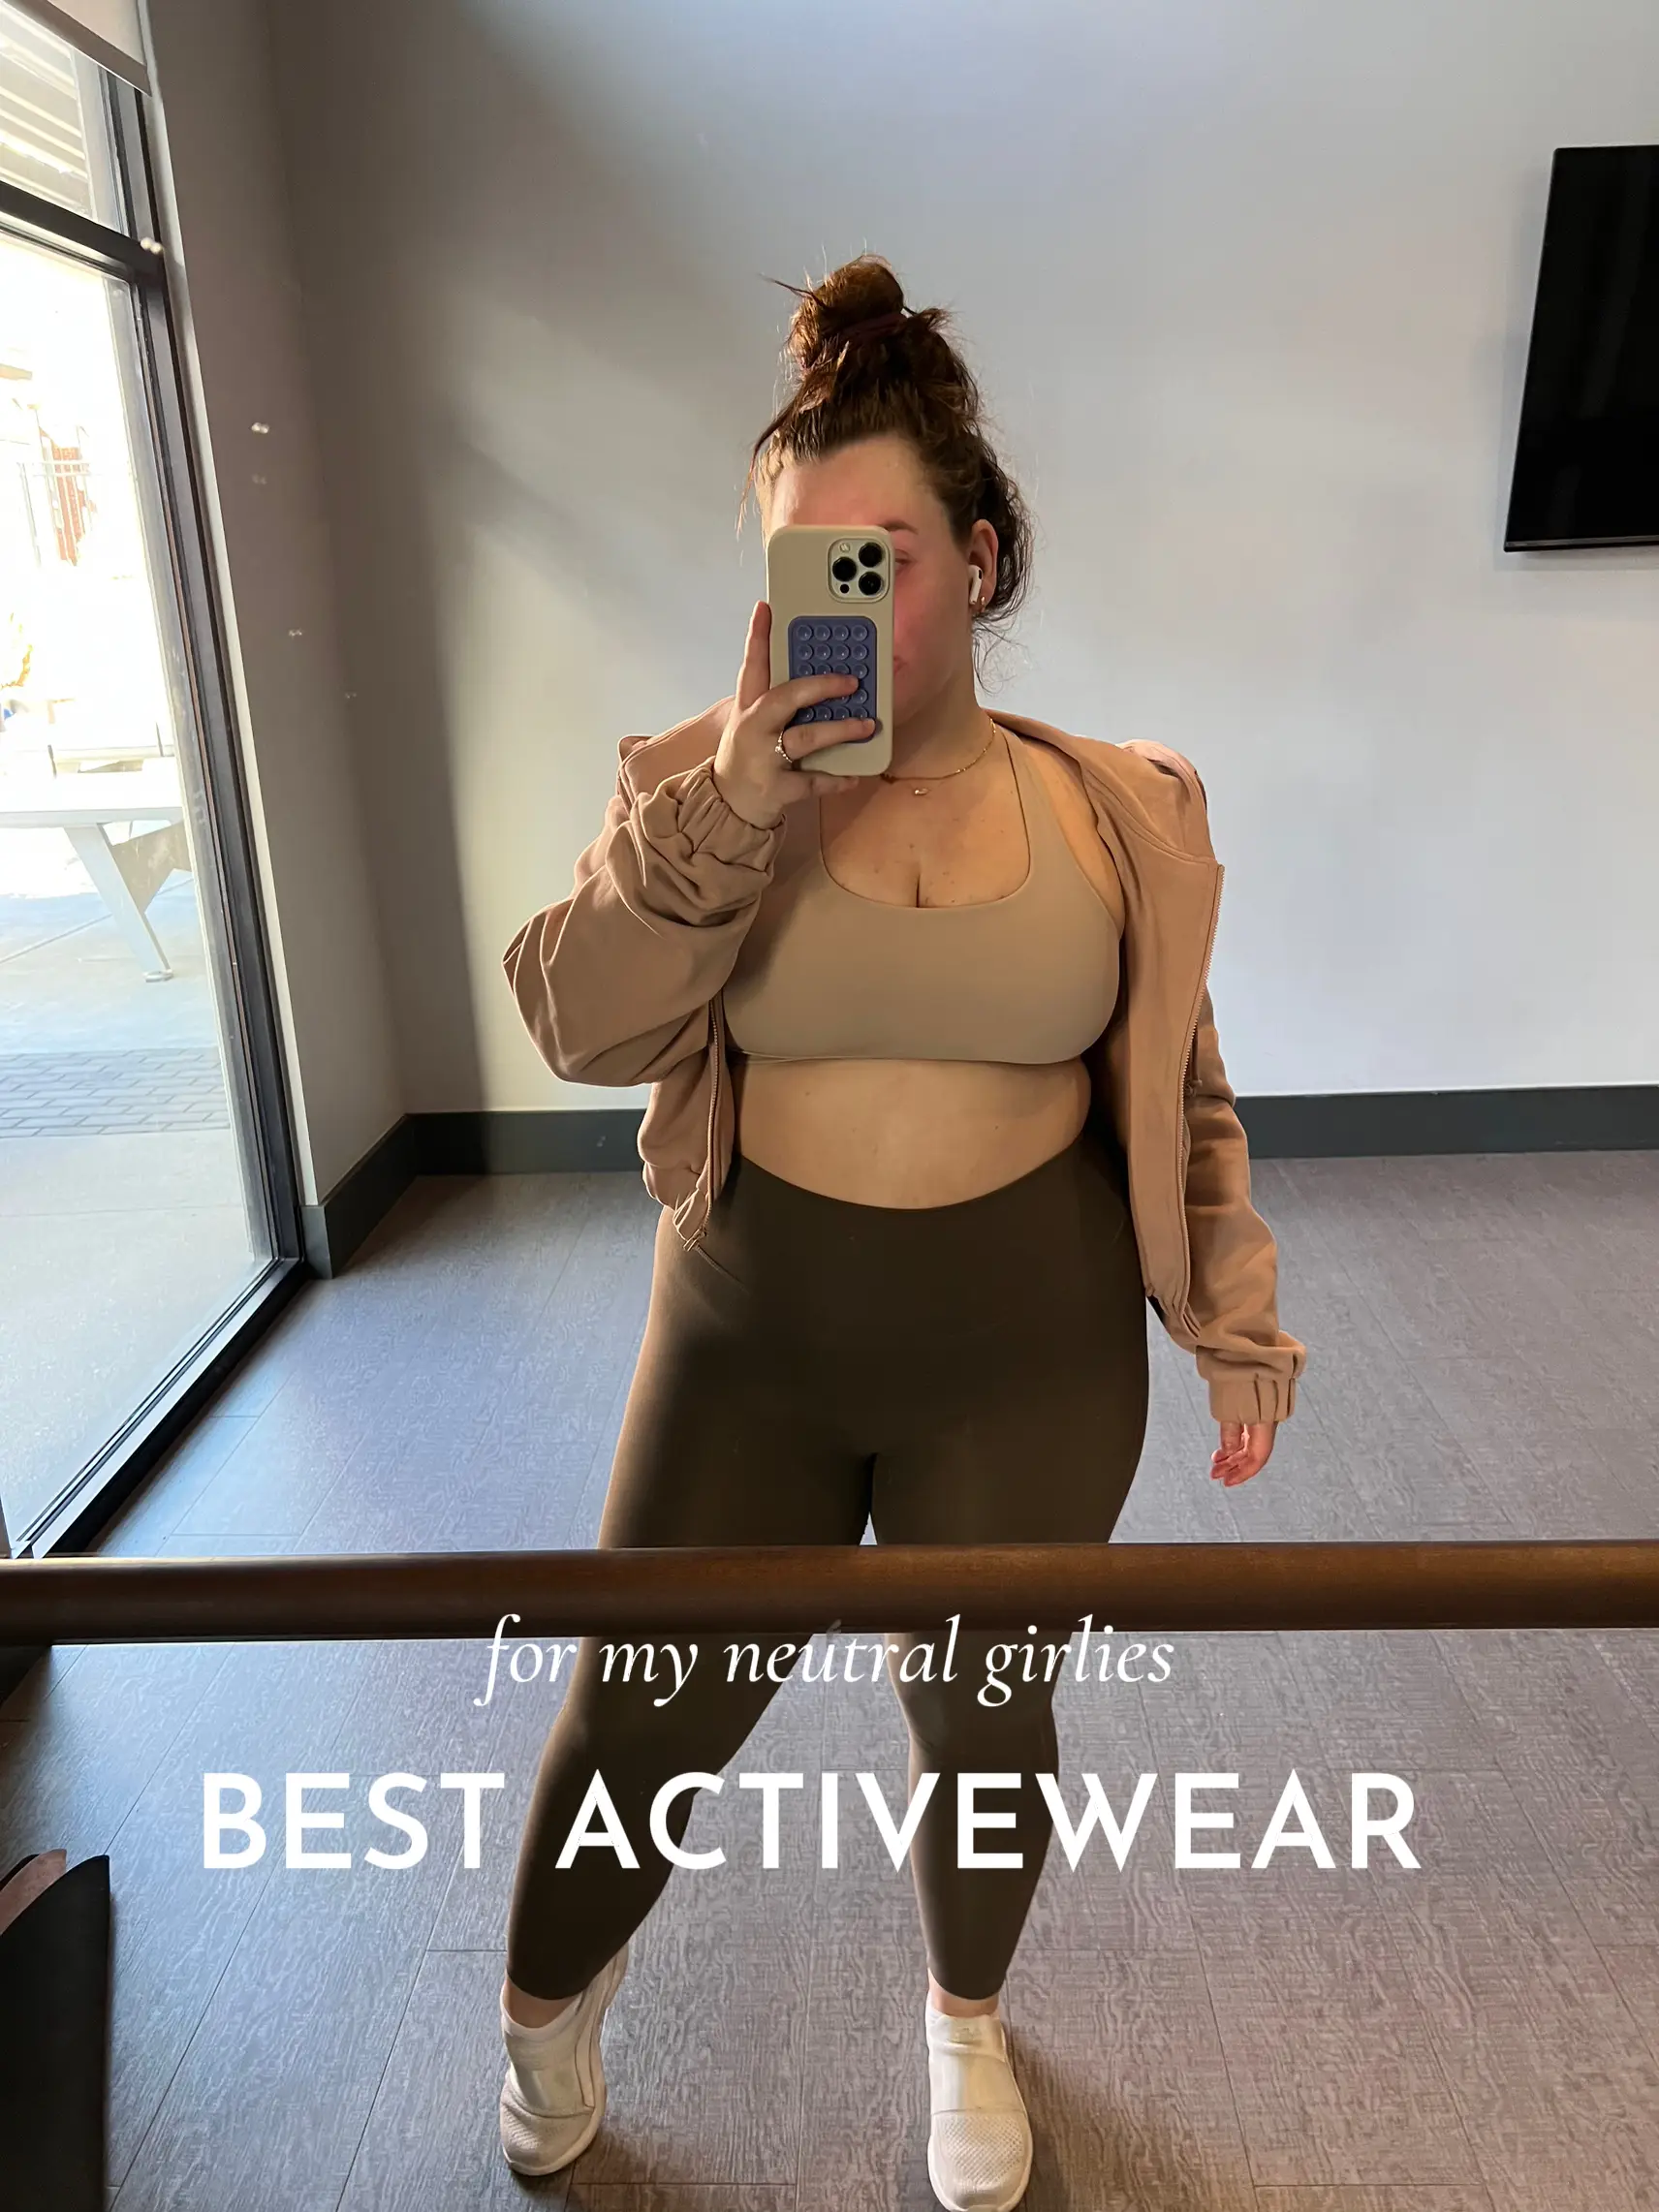 The Best Activewear For Nuetral Girlies! 🤎, Gallery posted by Nicole  Axelson